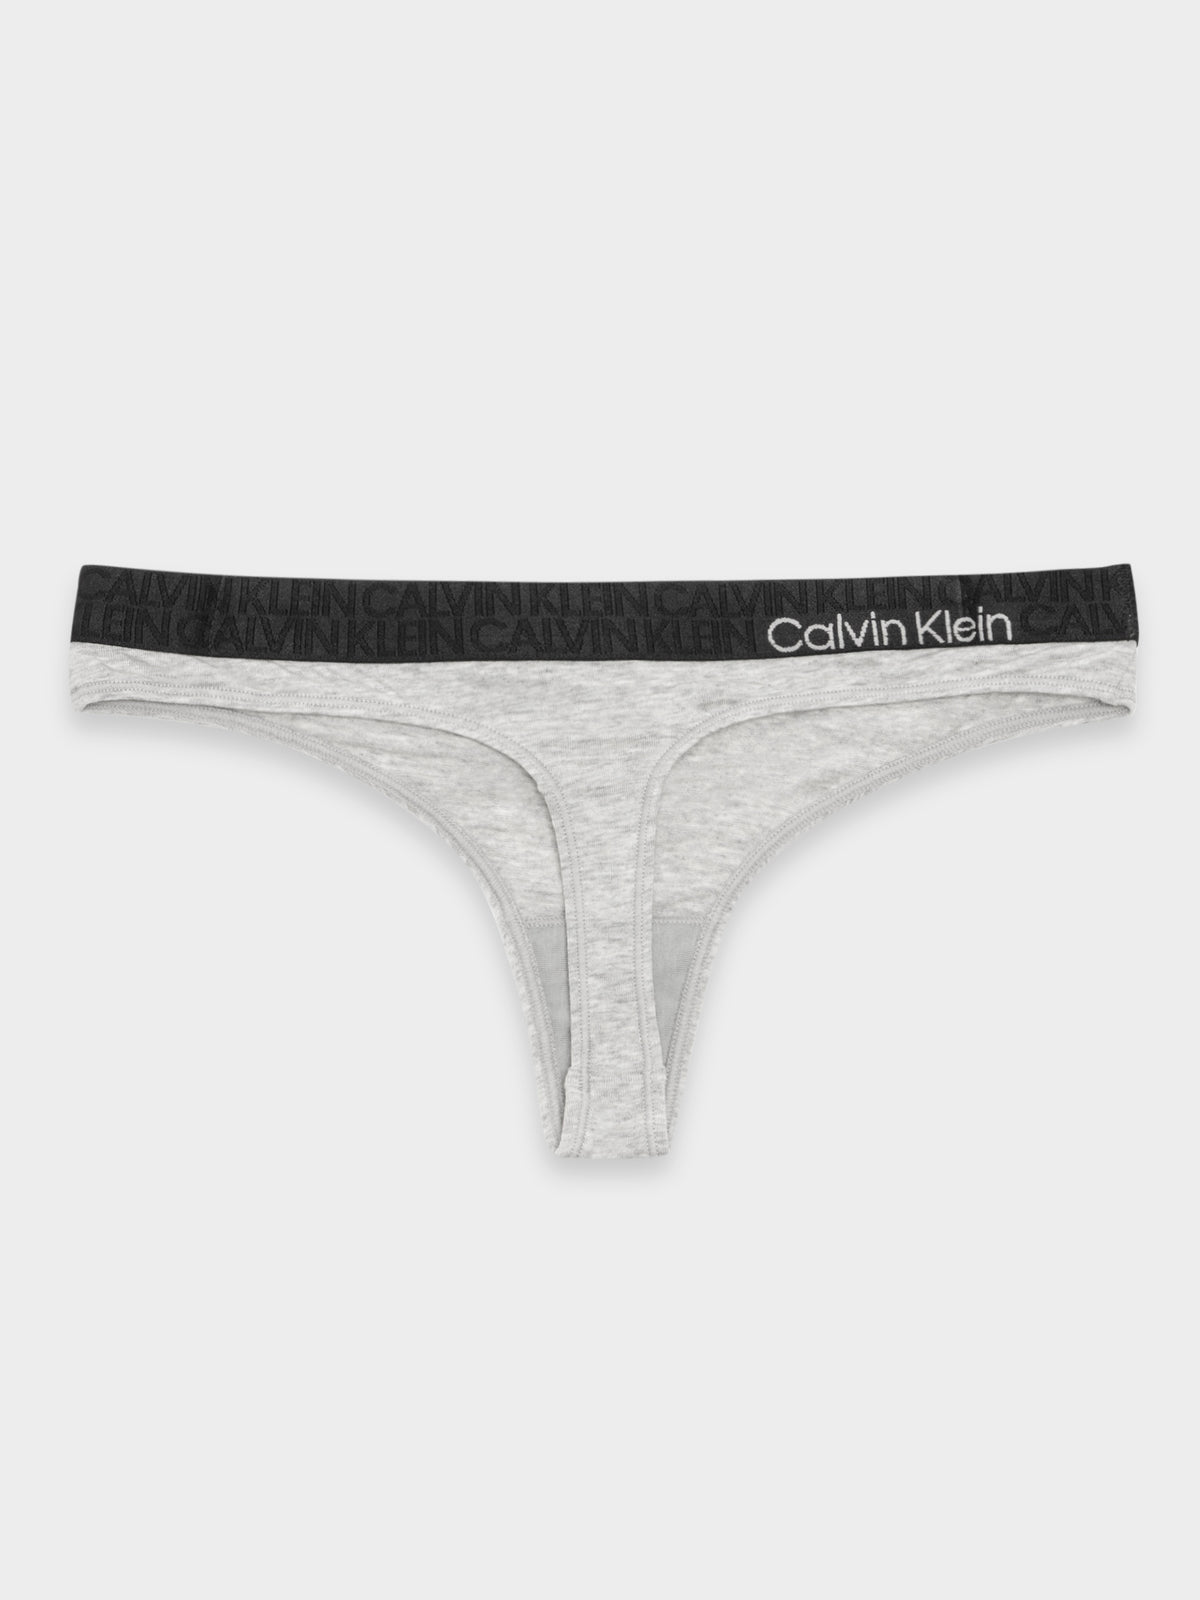 Reconsidered Comfort Thong in Grey Heather